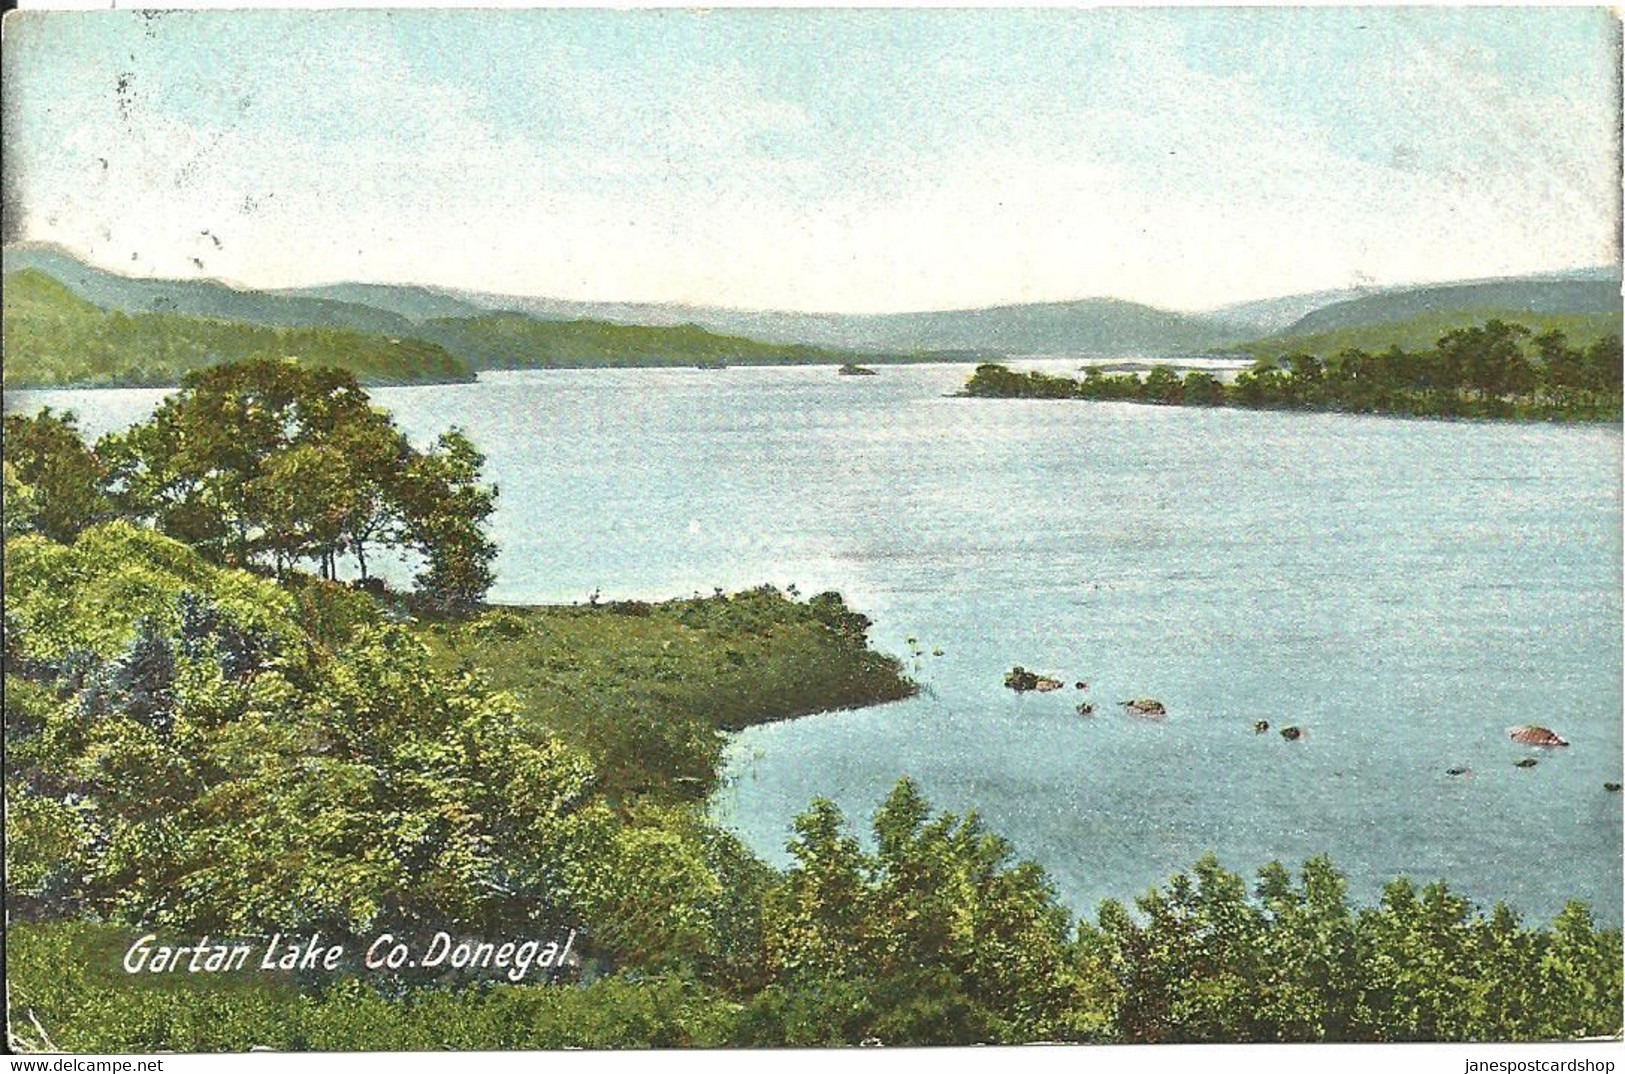 GARTAN LAKE  - COUNTY DONEGAL - IRELAND - WITH LONDONDERRY POSTMARK AND PORTRUSH ADDRESS - Donegal